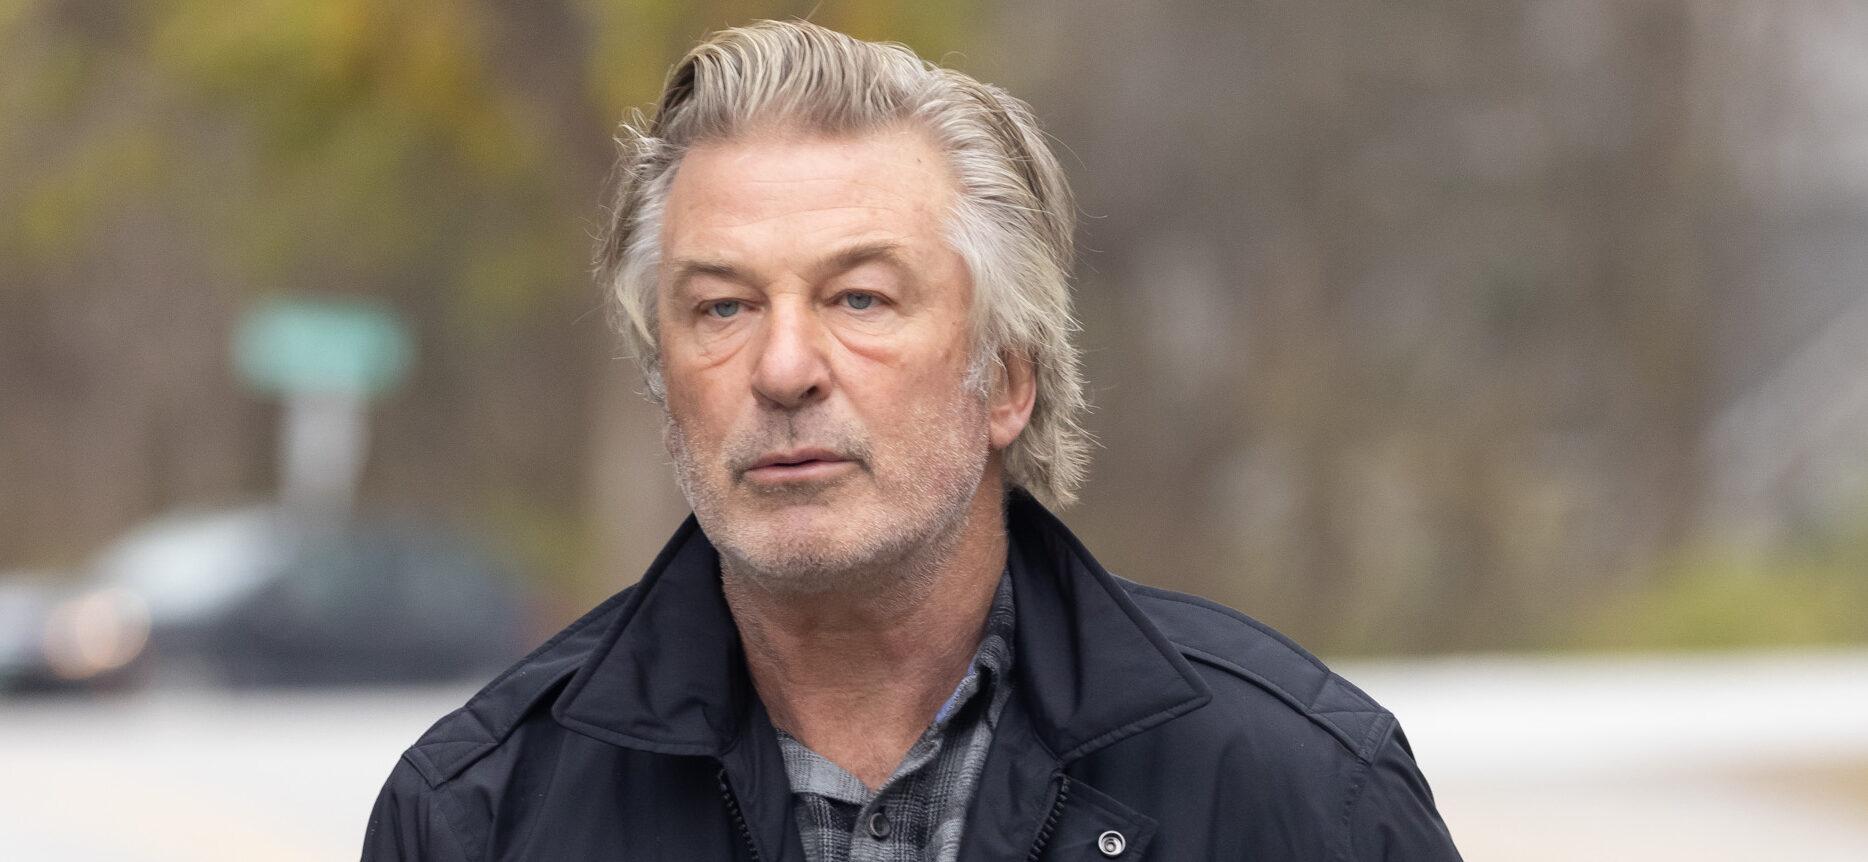 Alec Baldwin Says He Is ‘Going To Comply’ With Search Warrant: ‘This Is A Process’